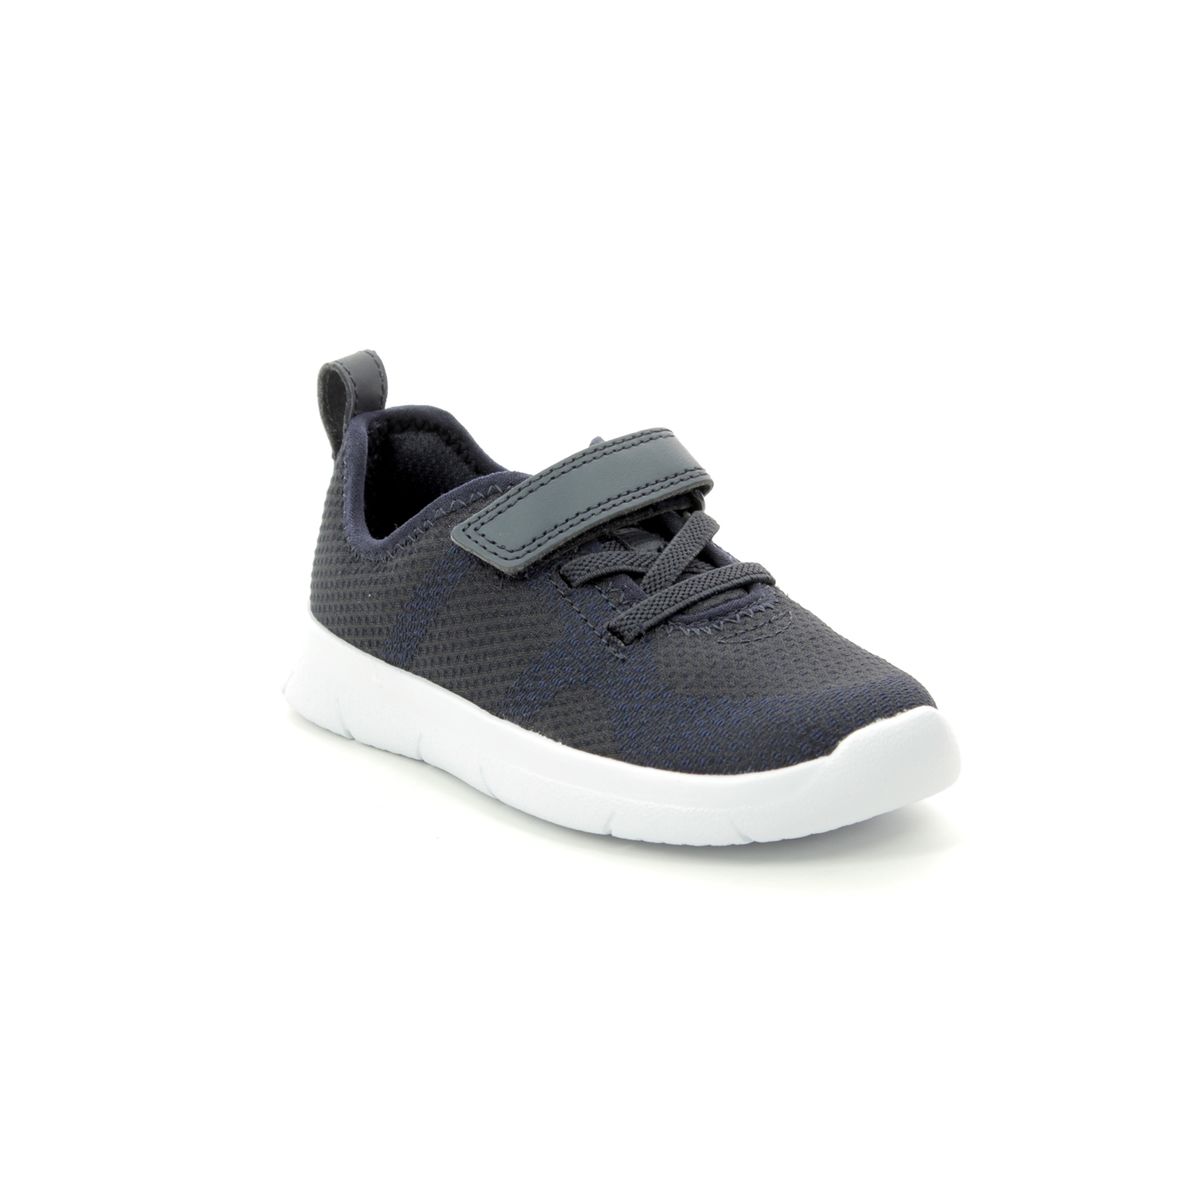 Clarks Ath Flux T Navy Kids Toddler Boys Trainers 412696F In Size 7 In Plain Navy F Width Fitting Regular Fit For kids